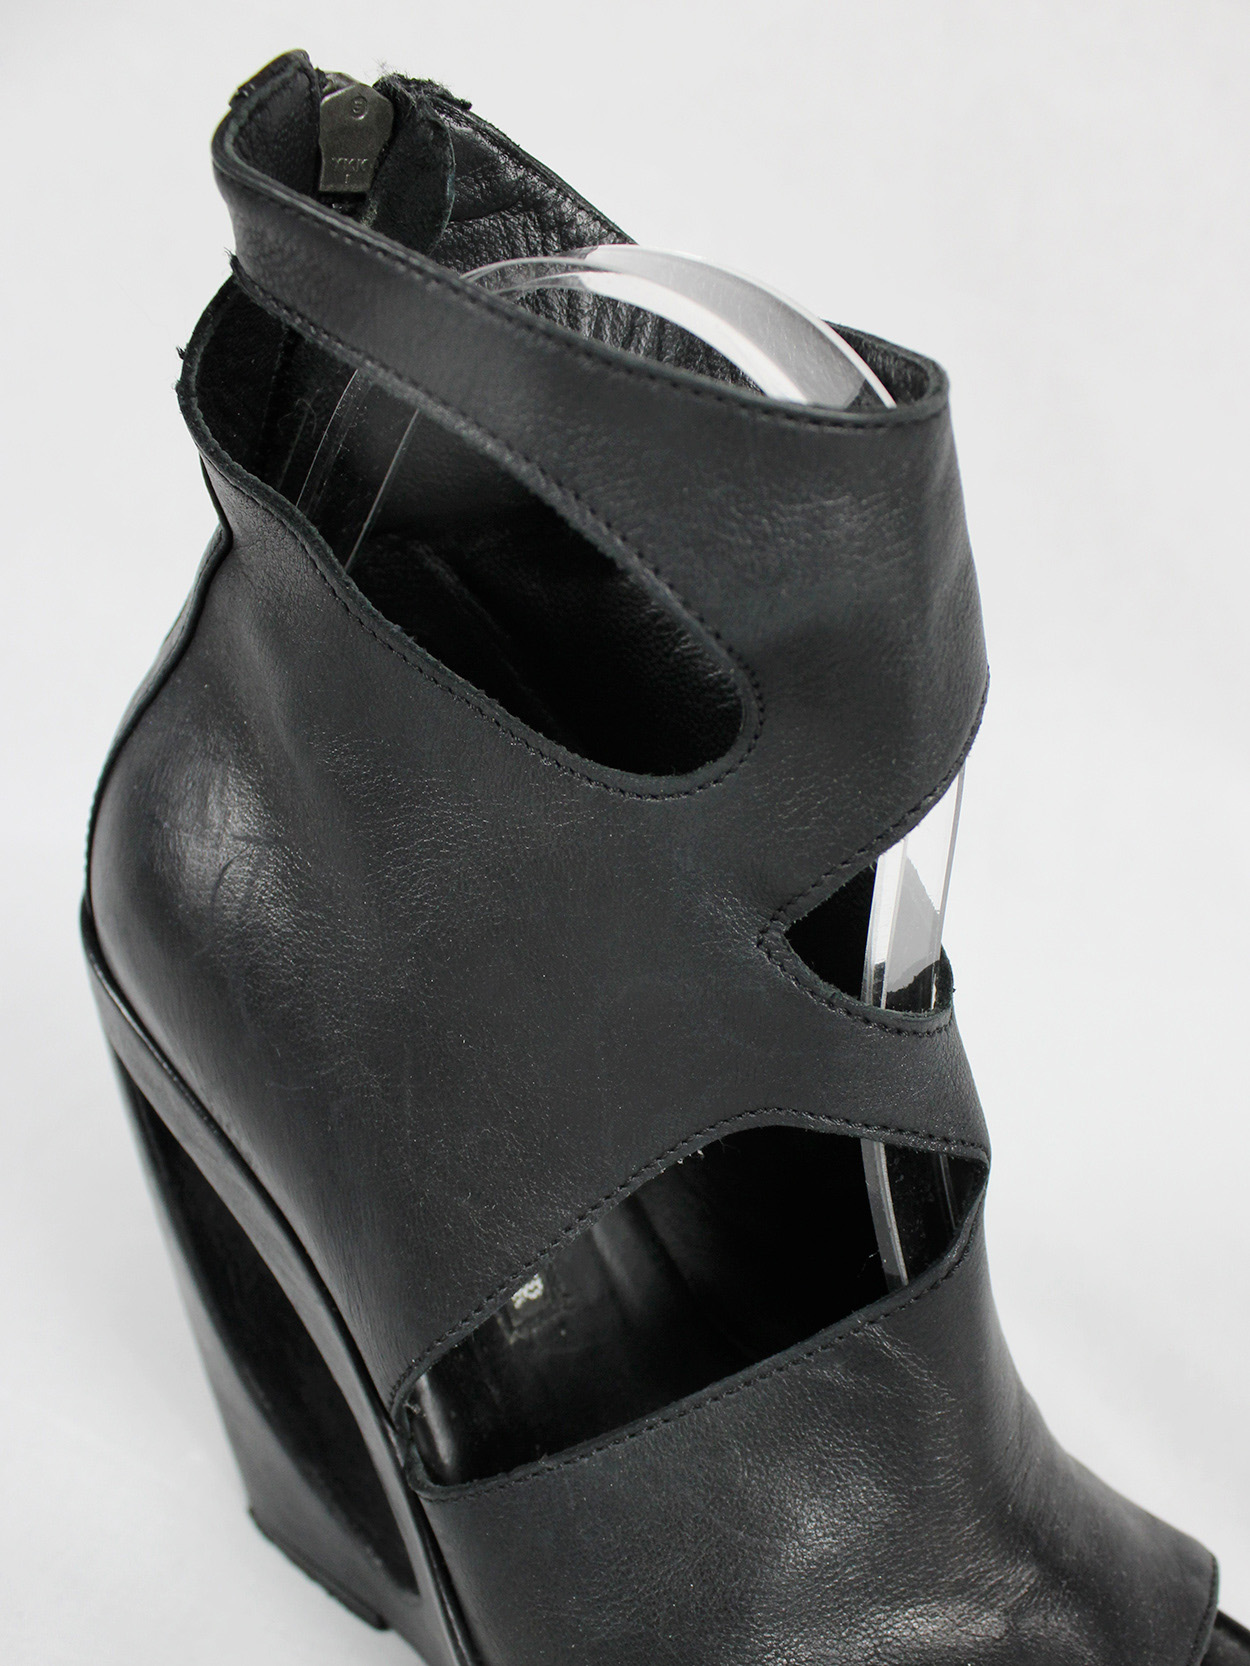 vaniitas Ann Demeulemeester black boots with cut-out curved heel fall 2013 (15)